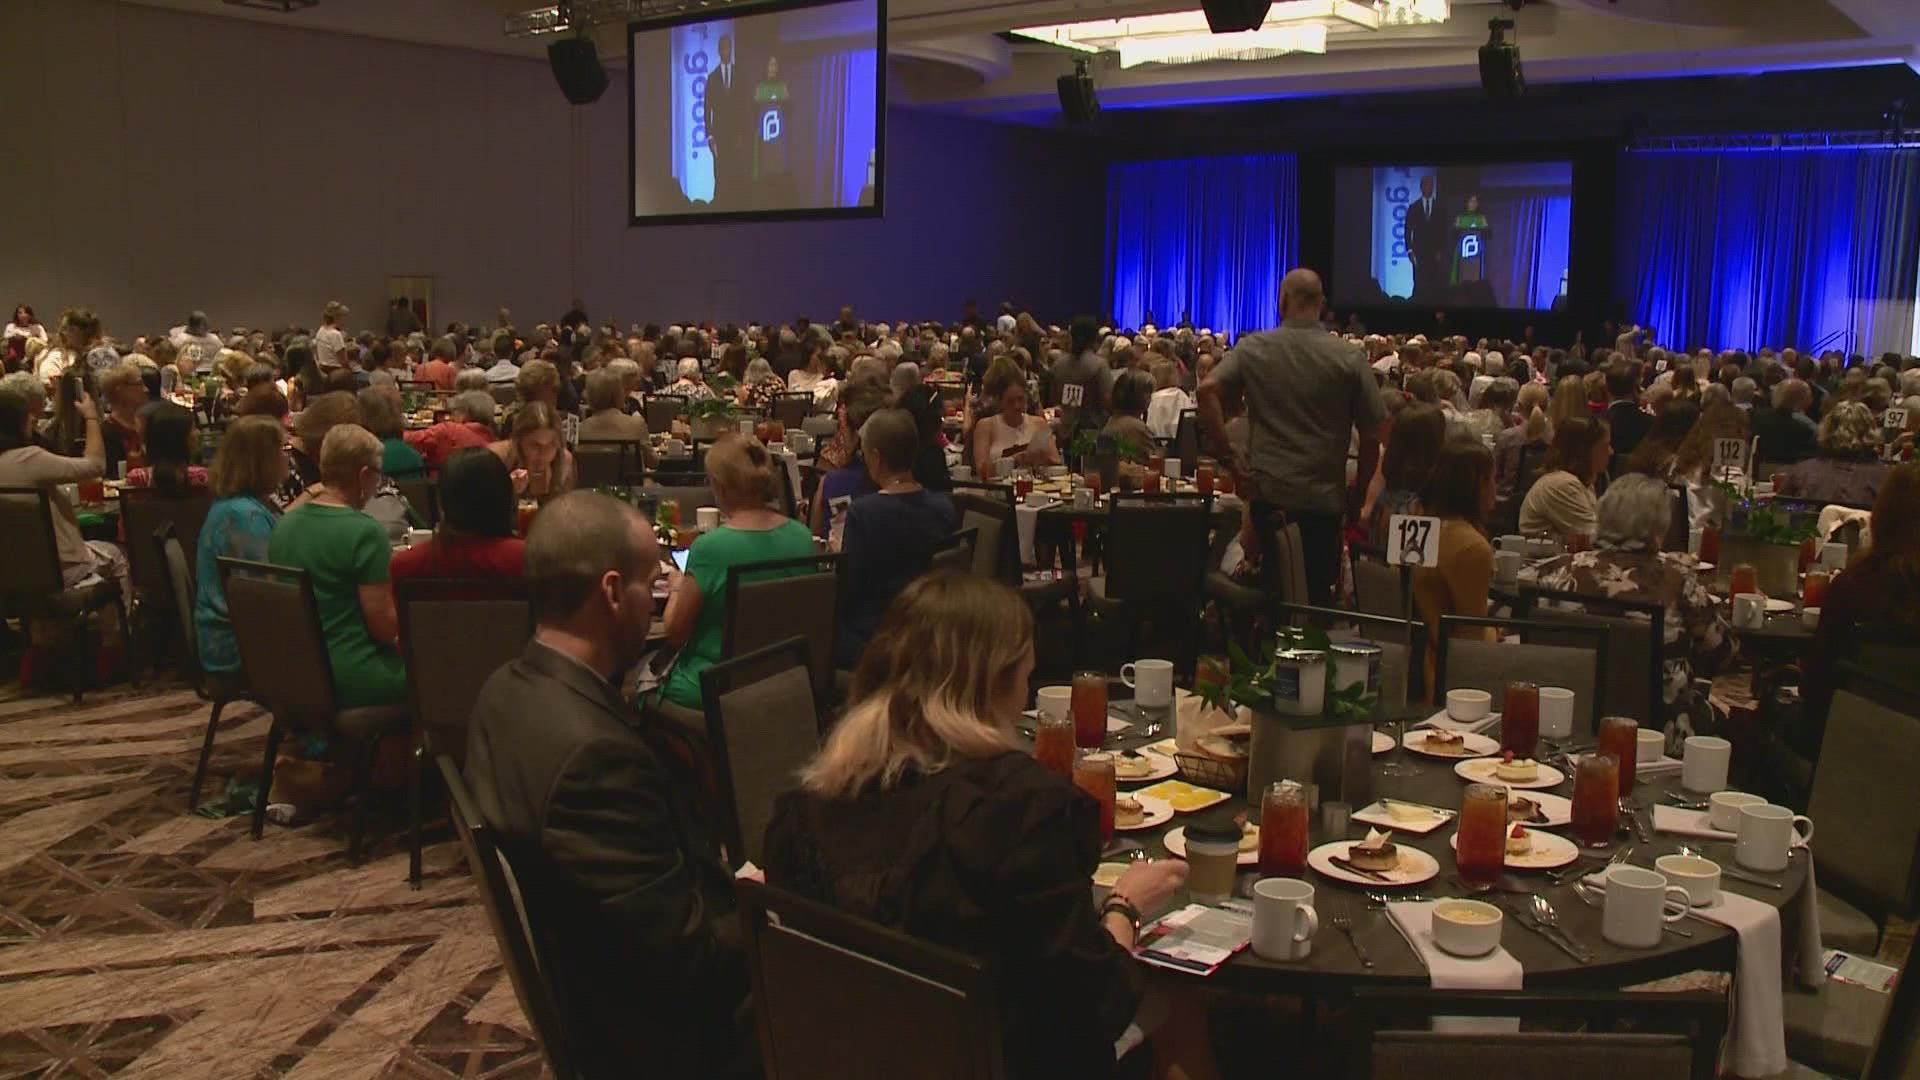 Planned Parenthood of South Texas hosted Gloria Steinem, world-renowned feminist and activist, at its annual luncheon Friday.